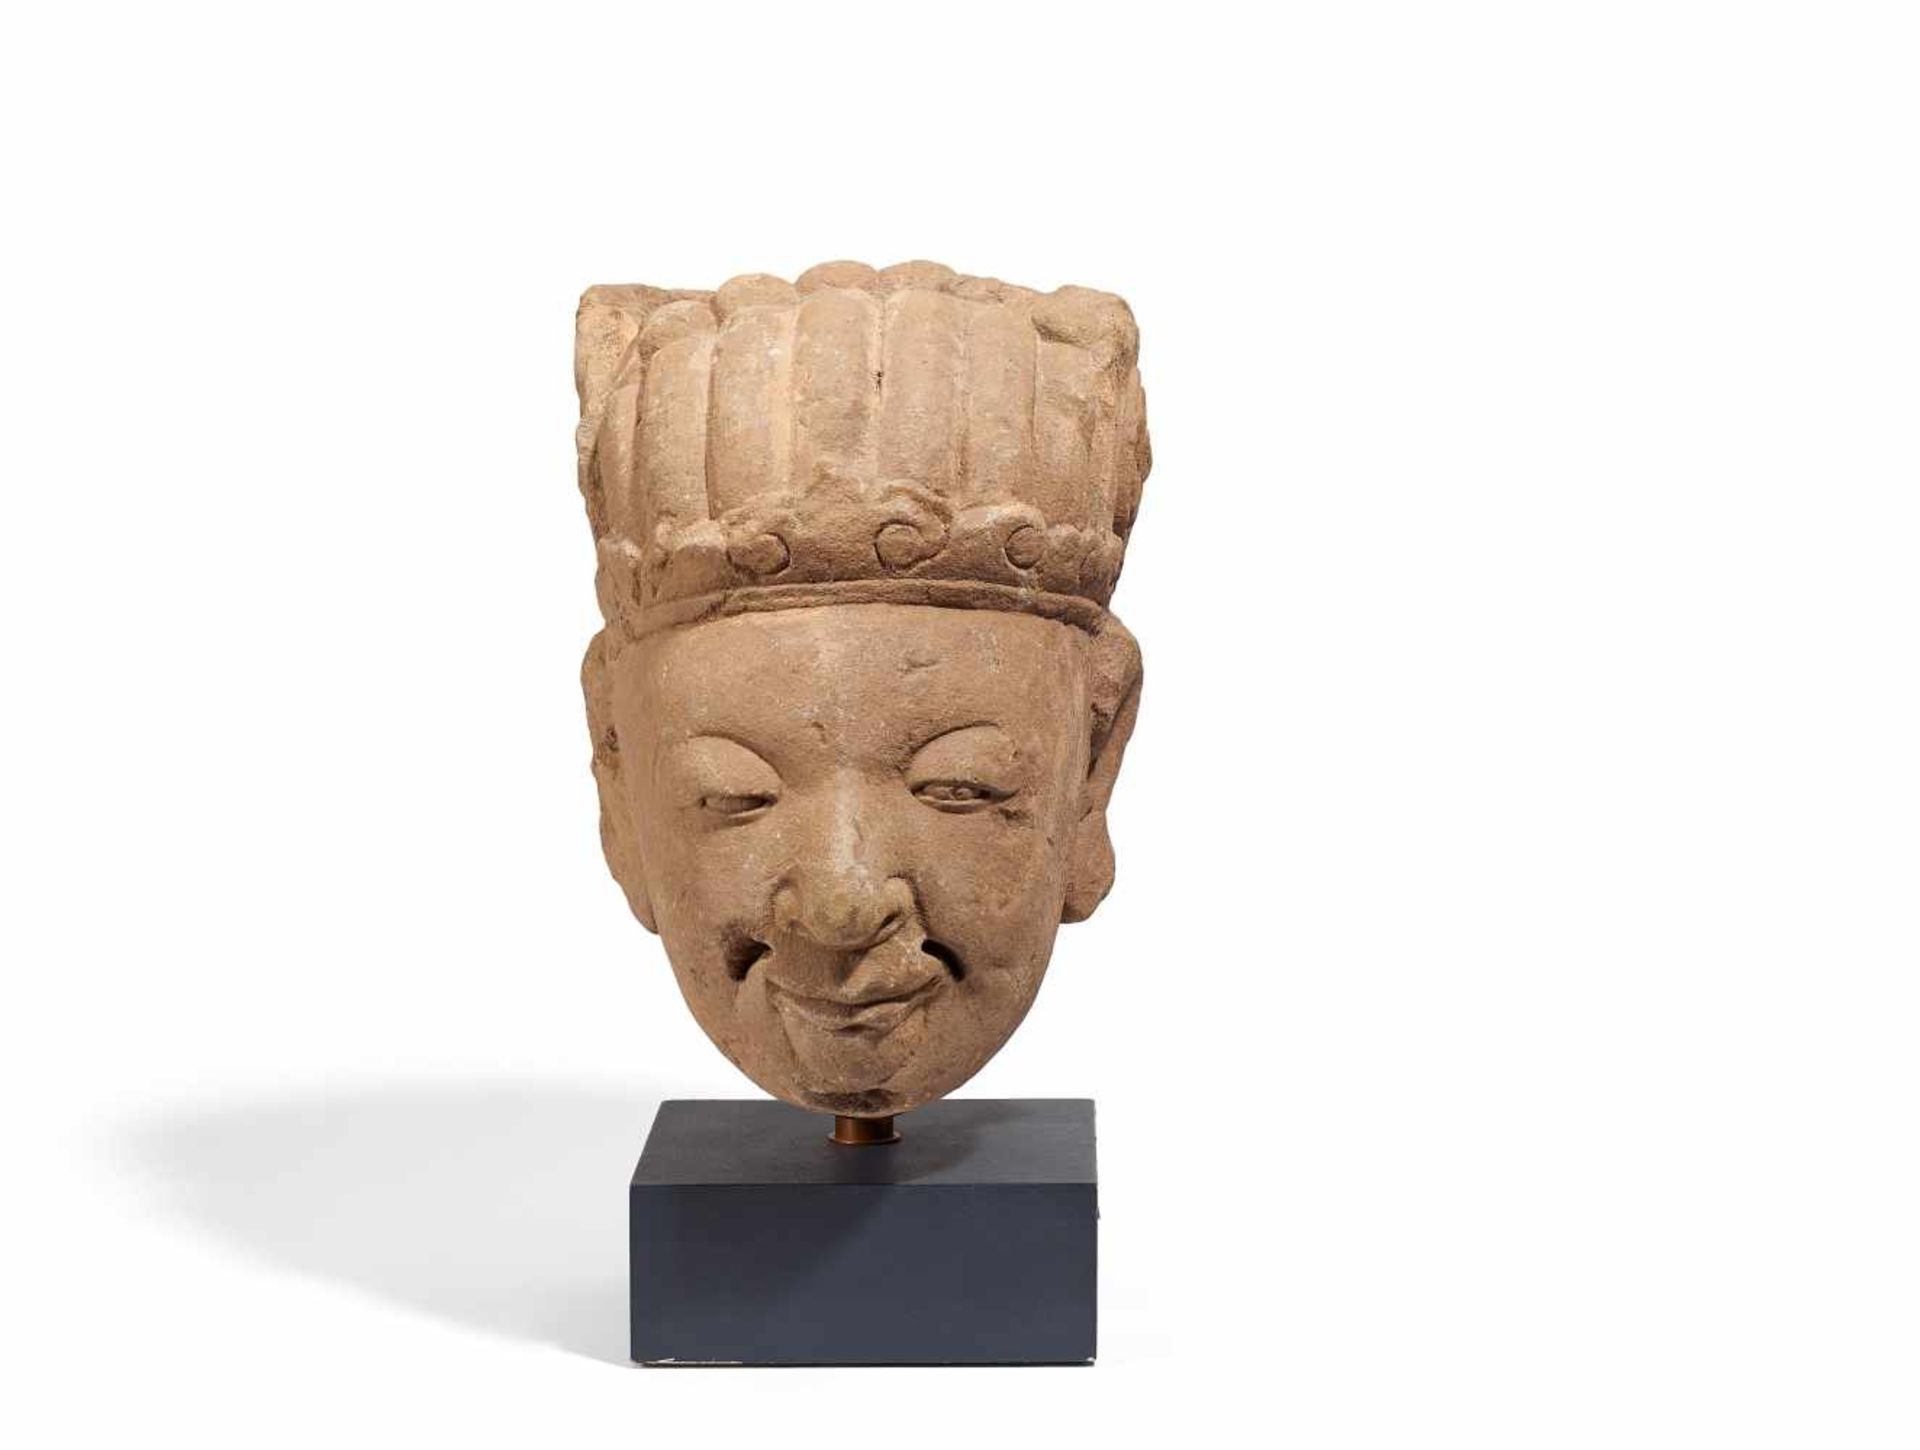 HEAD OF WENCHANG. China. Ming dynasty (1368-1644). Pink sandstone. The courtly headgear suggests